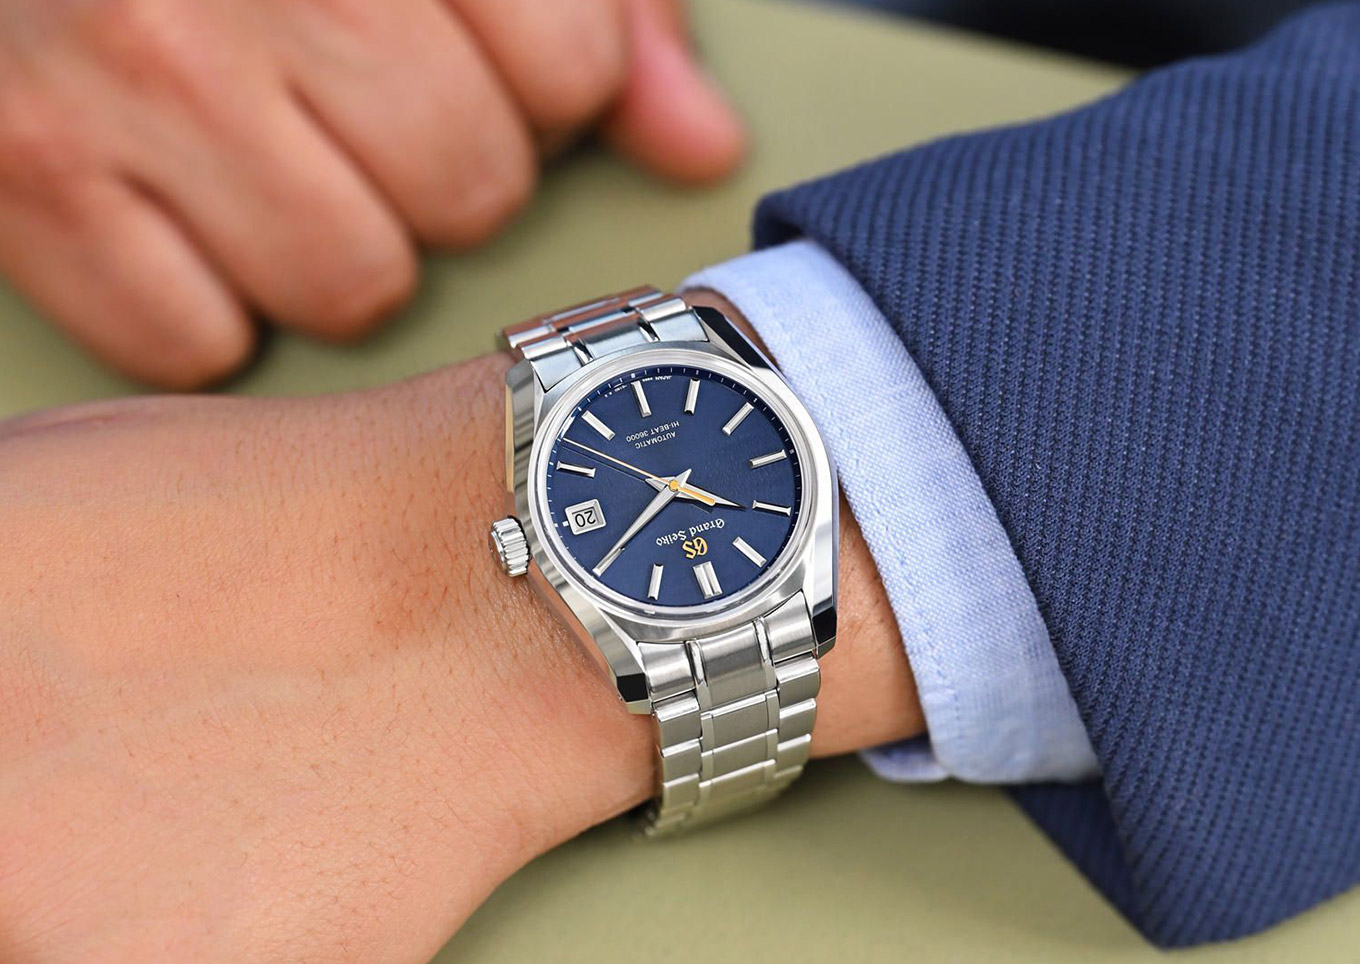 Grand Seiko Heritage with a 40mm case and a stunning blue dial